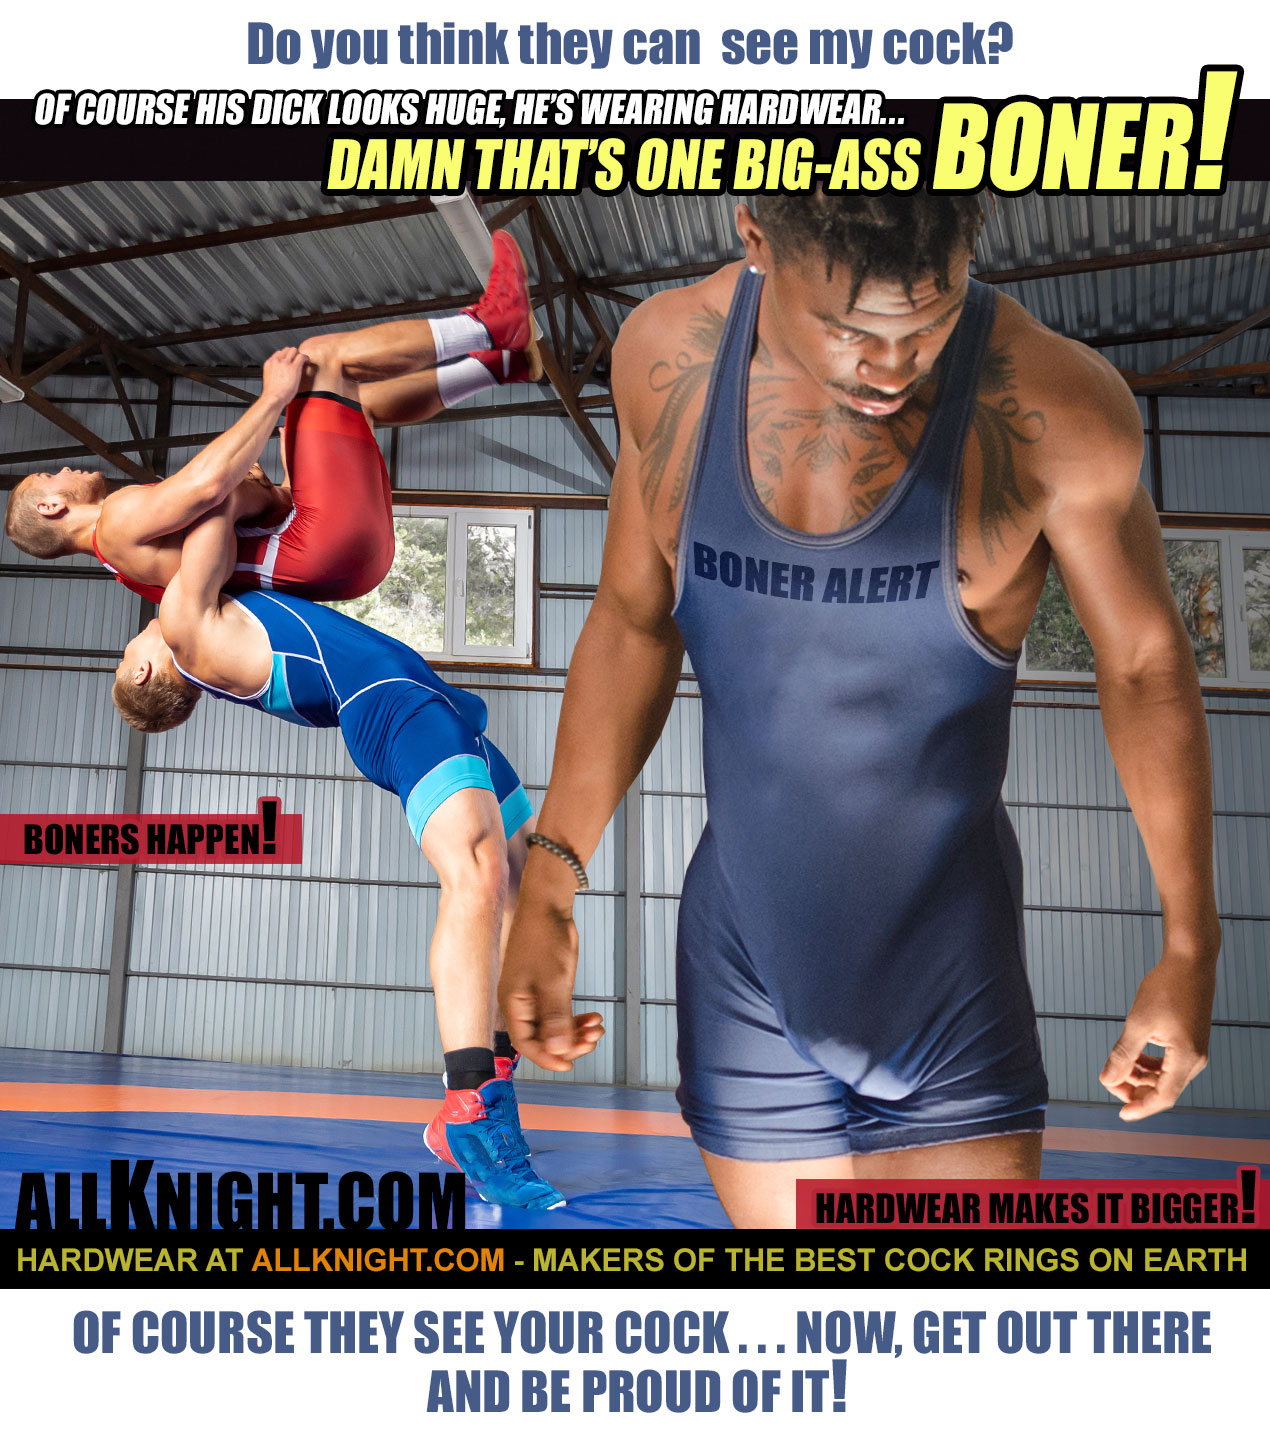 Wrestling Boner Alert: Wrestling and other contact sports are notorious for the fact that guys frequently get hard to some extent while rolling around with each other. Often embarrassing at first, many guys end up finding this unexpected side effect of the game to be an unspoken joy, and a physical representation of male aggressive energy. Indeed, many guys learn, especially later in life, that they want to fill out the front of their singlet, slacks, jeans, etc… with an eye-catching bulge. Hardwear gear and products are perfect to give you the shower size you’re after.